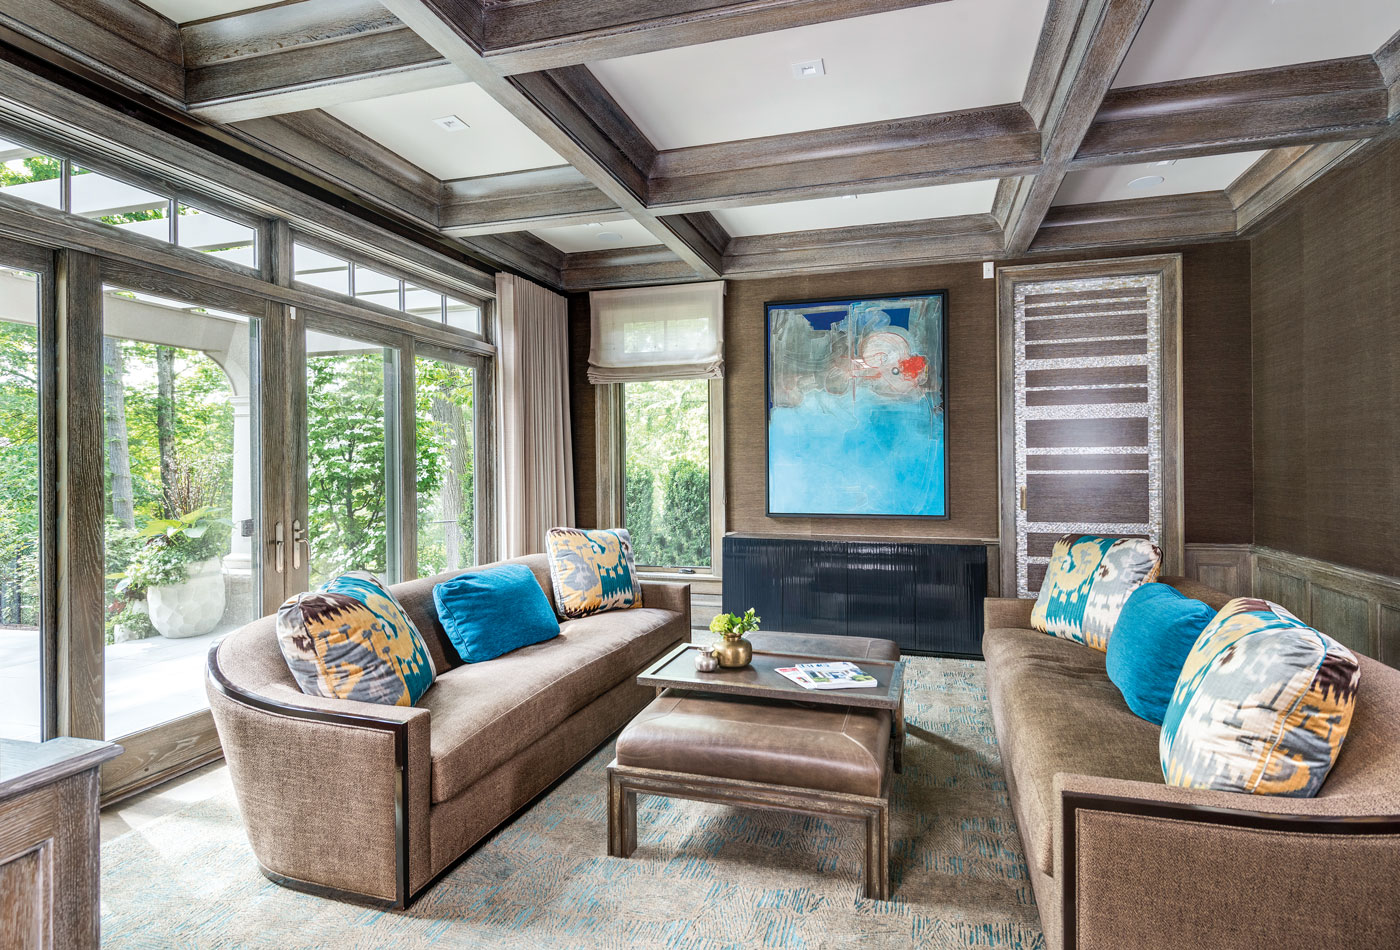 Family room with Far East and Asian influences in a high-end custom suburban Boston home.